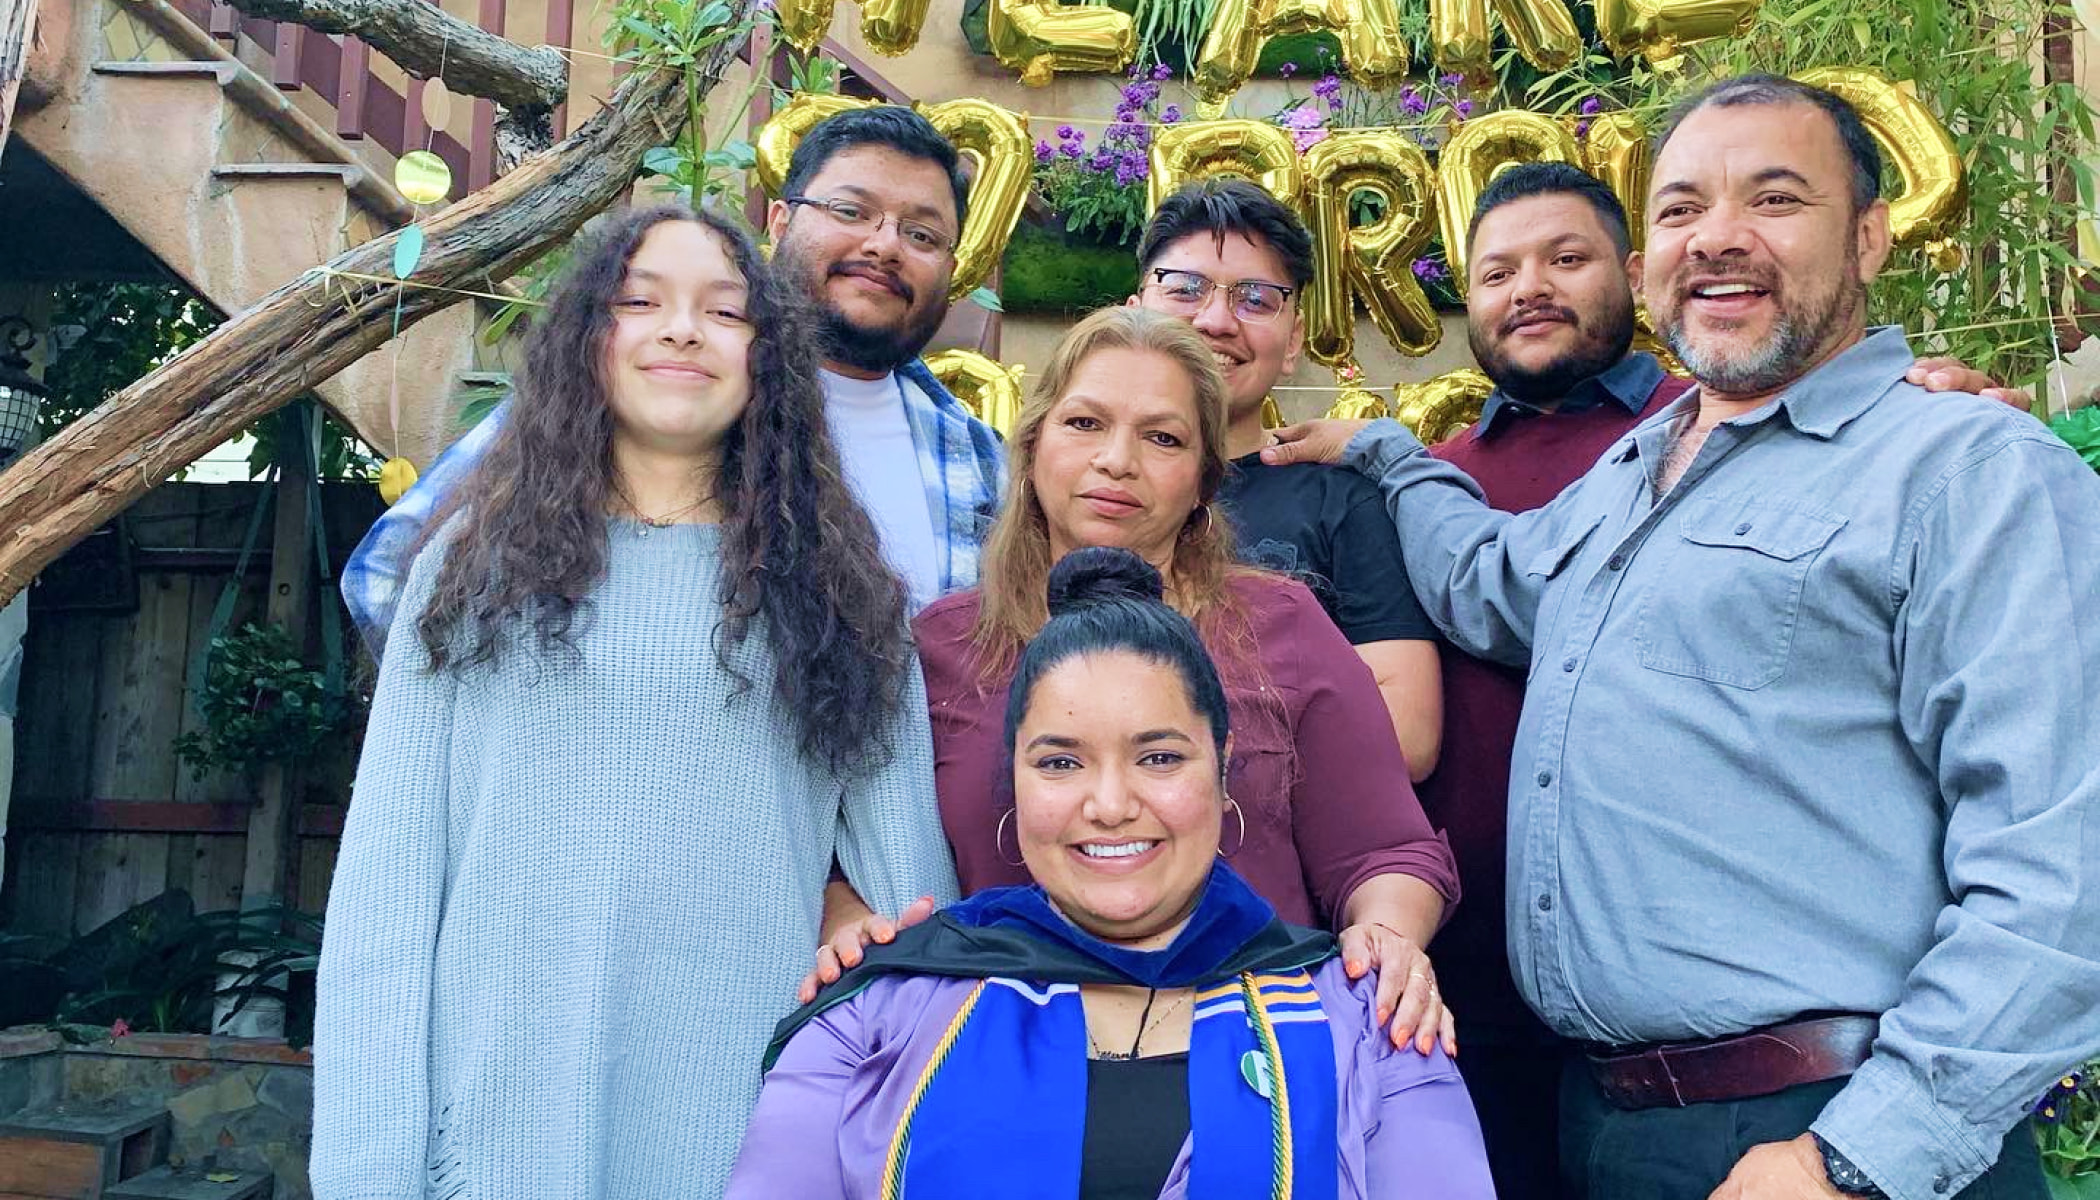 A group of people pose for a photo. In the center front is Mirna Cervantes, wearing graduation garb.